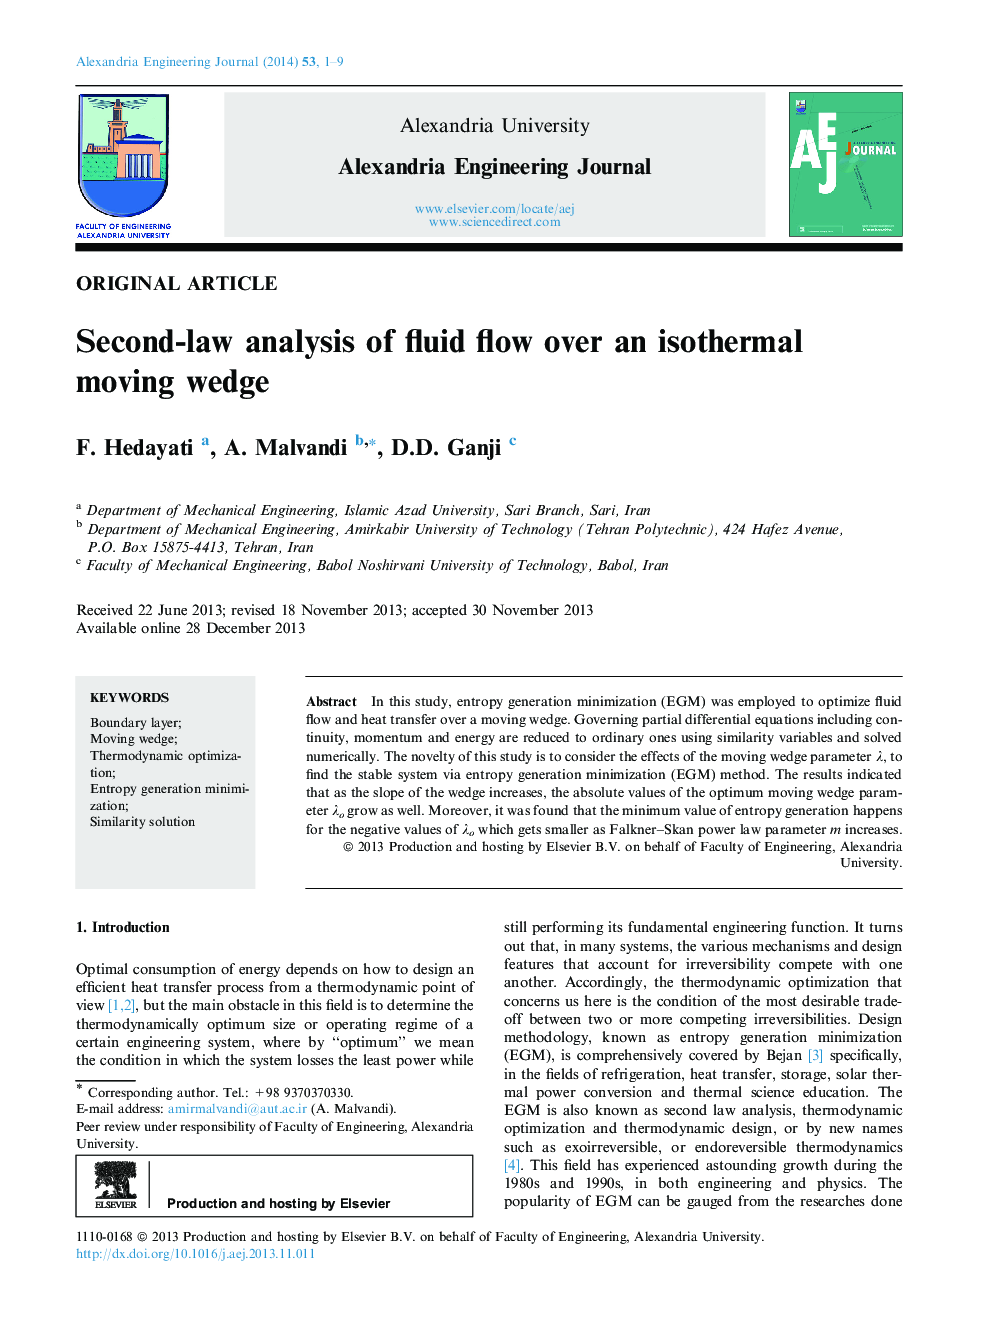 Second-law analysis of fluid flow over an isothermal moving wedge 